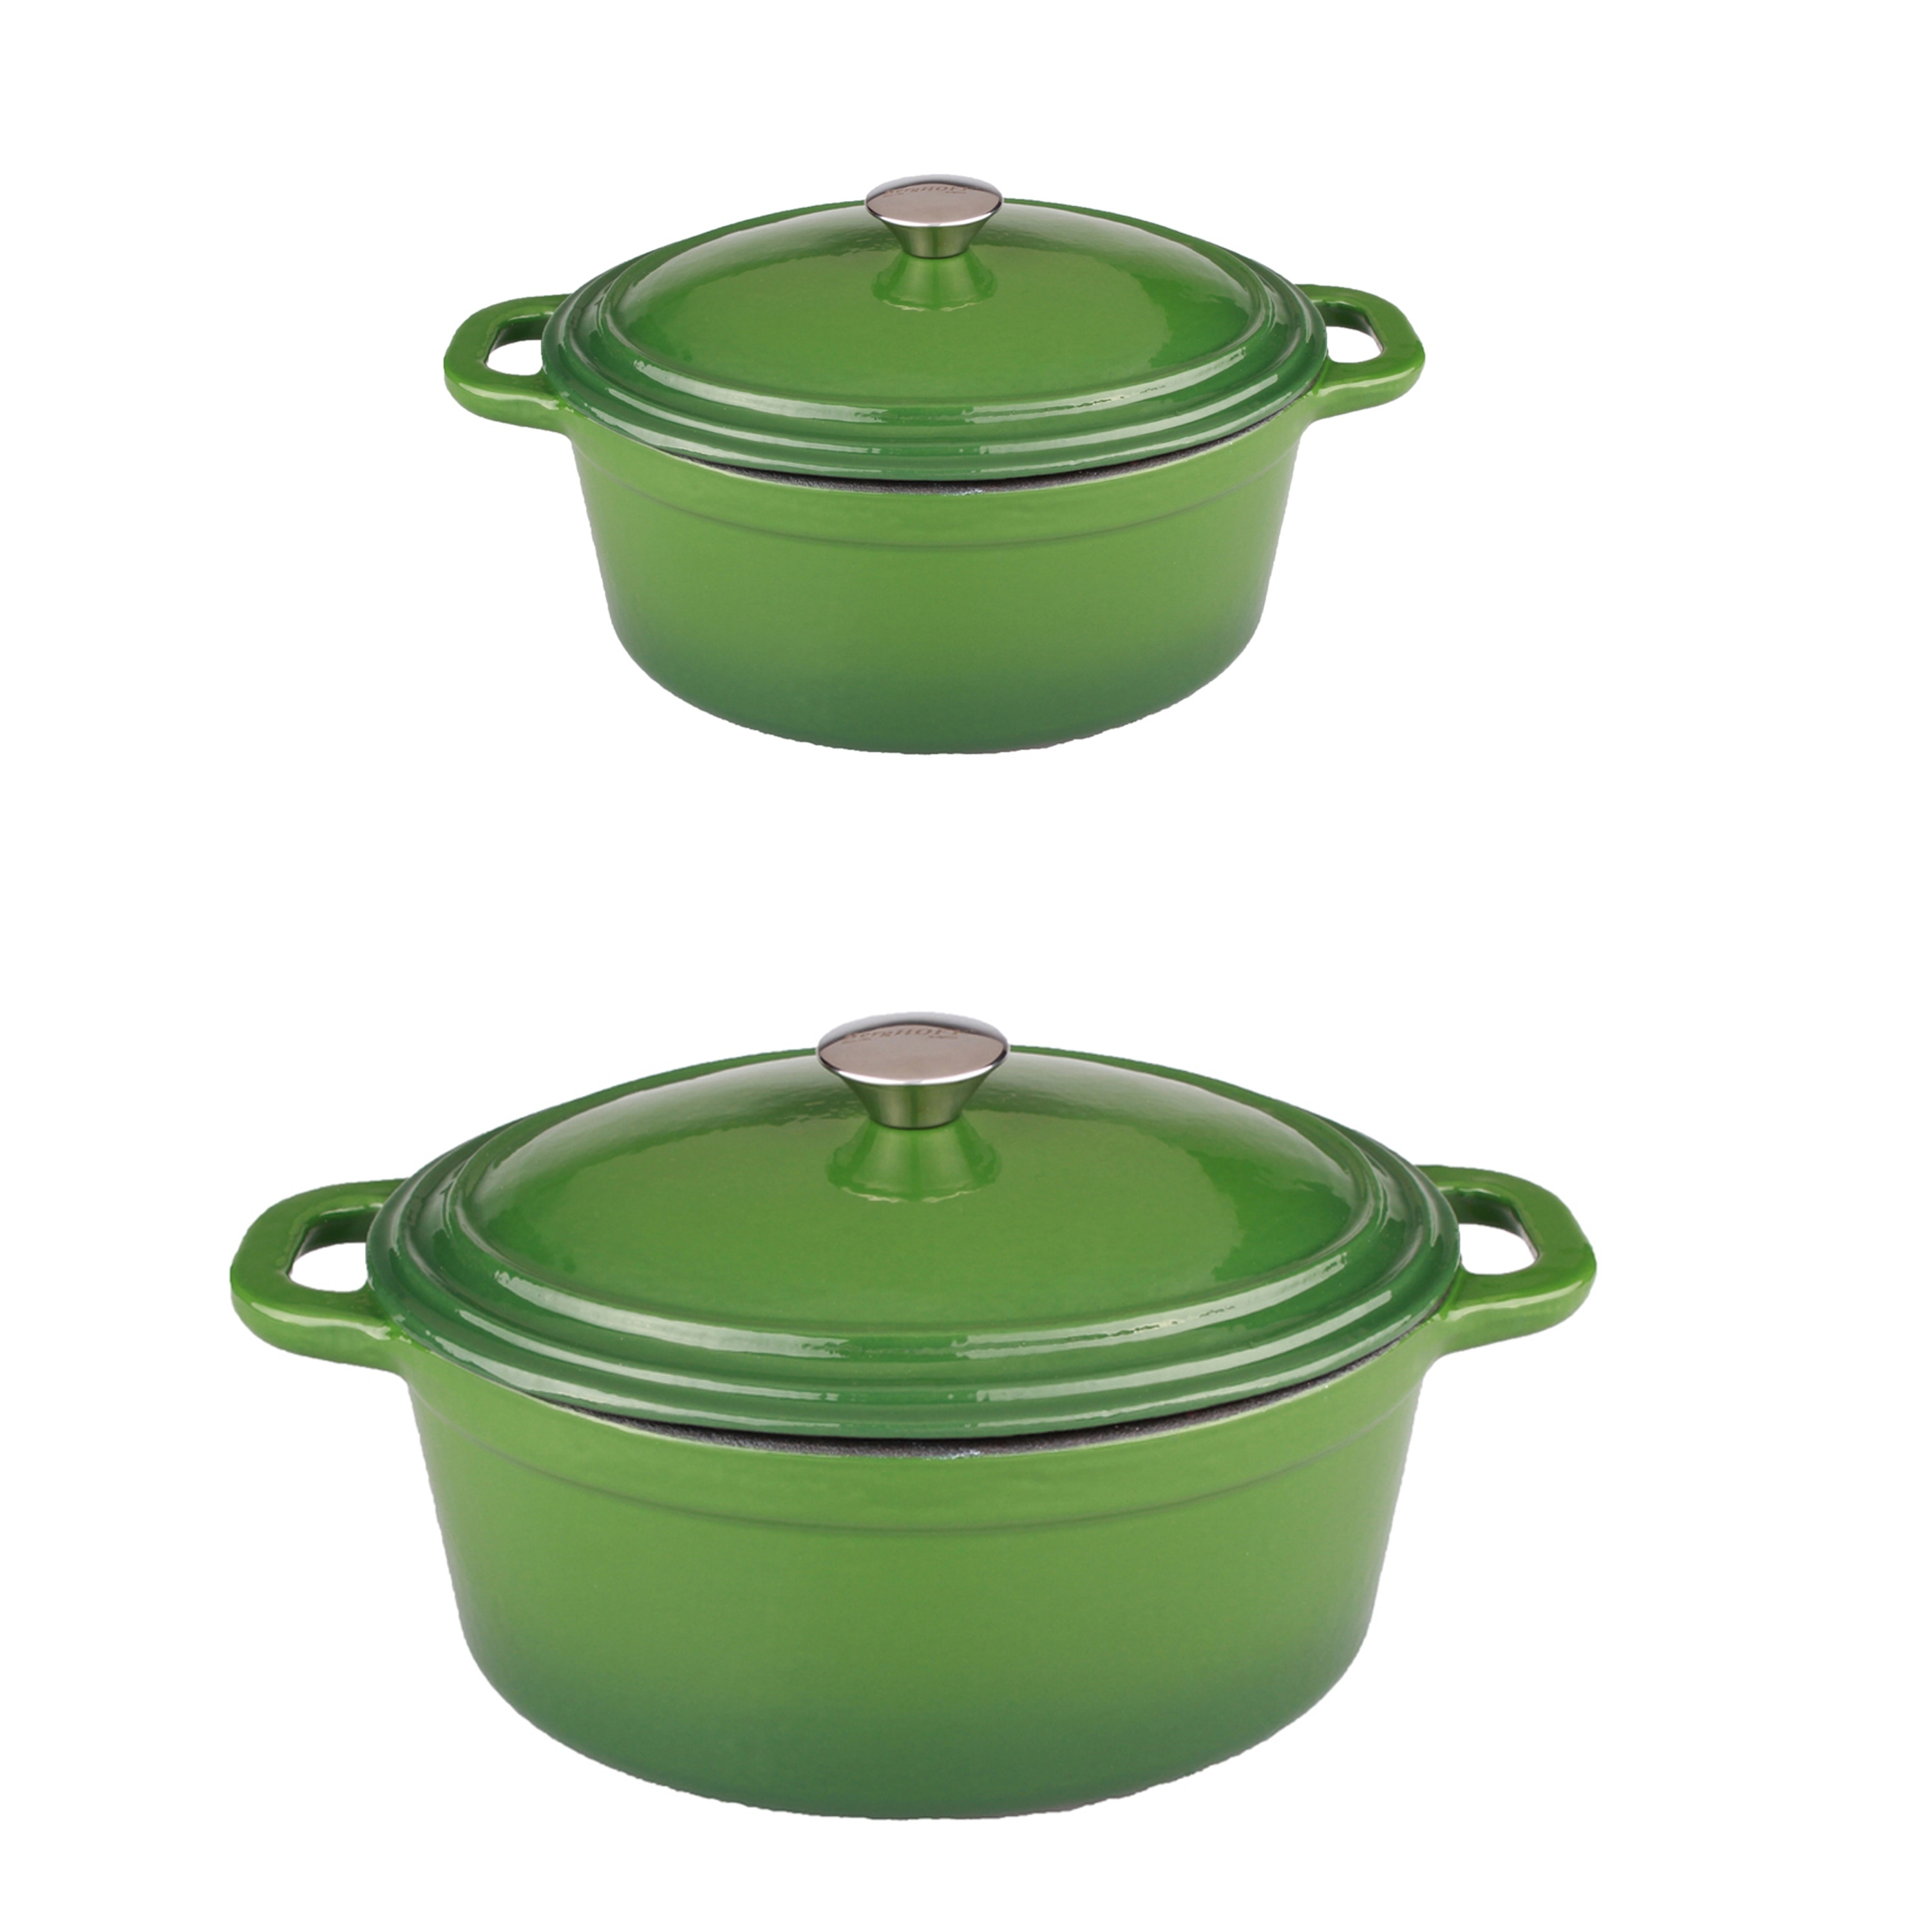 https://ak1.ostkcdn.com/images/products/is/images/direct/b27c7d04b1f7357b1662403946a3eb9108419618/Neo-4pc-Cast-Iron-Set-5-%26-8-Qt.-Cov-Dutch-Ovens-Green.jpg